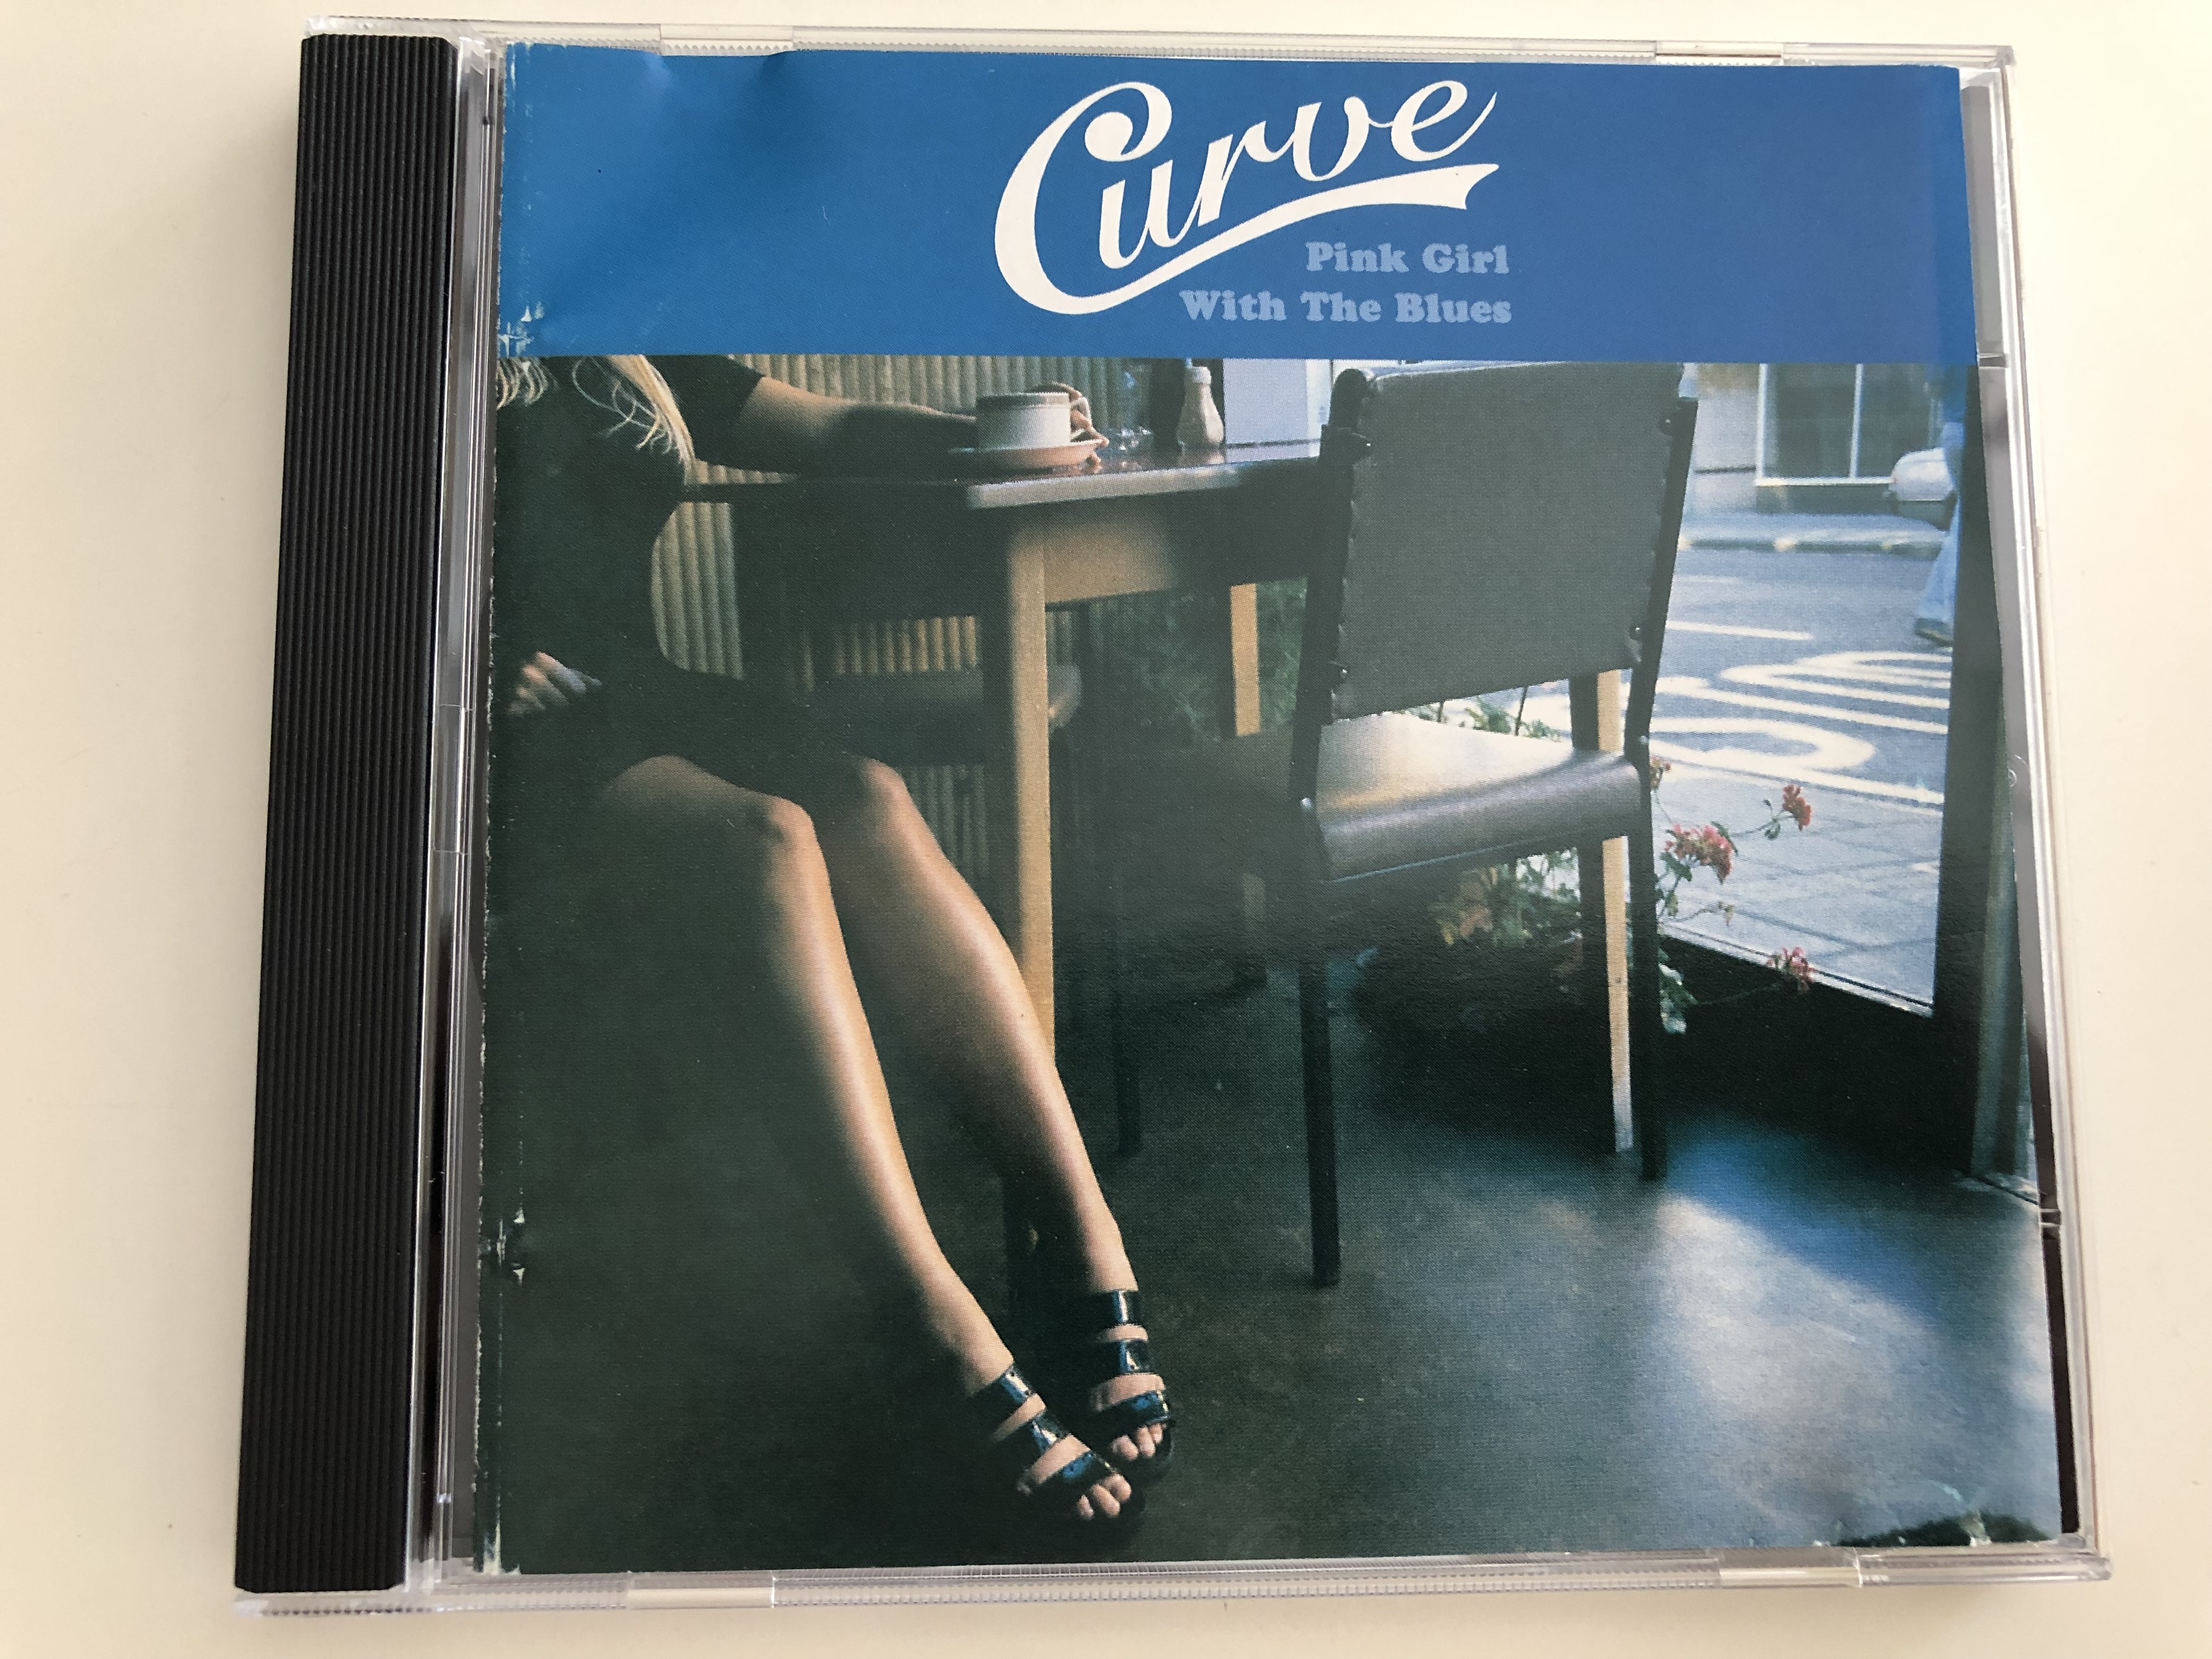 curve-ping-girl-with-the-blues-audio-cd-1996-fatlip-productions-lipcd-001-1-.jpg